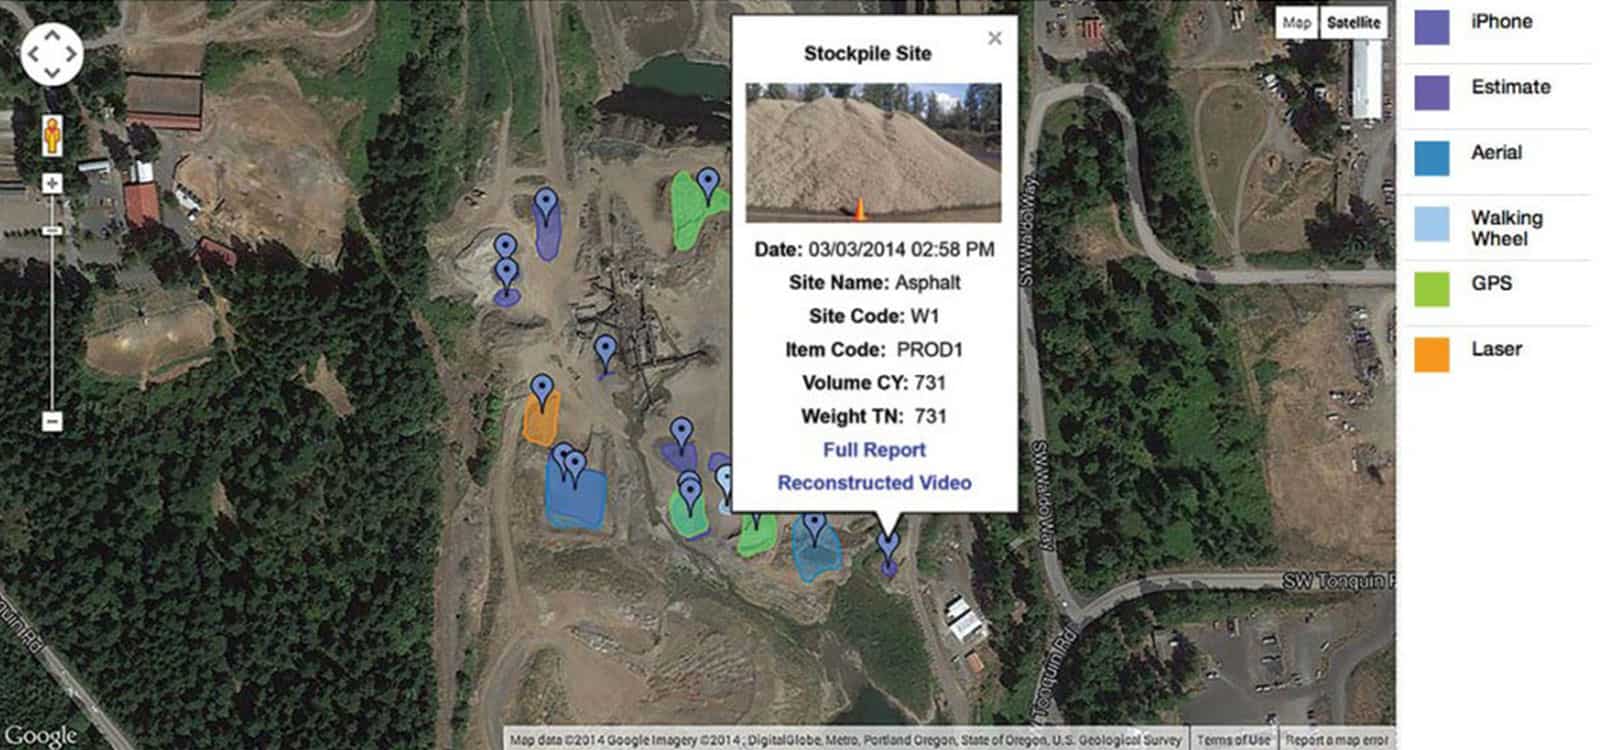 View and Share Measurements with Reports | Blog | Stockpile Reports